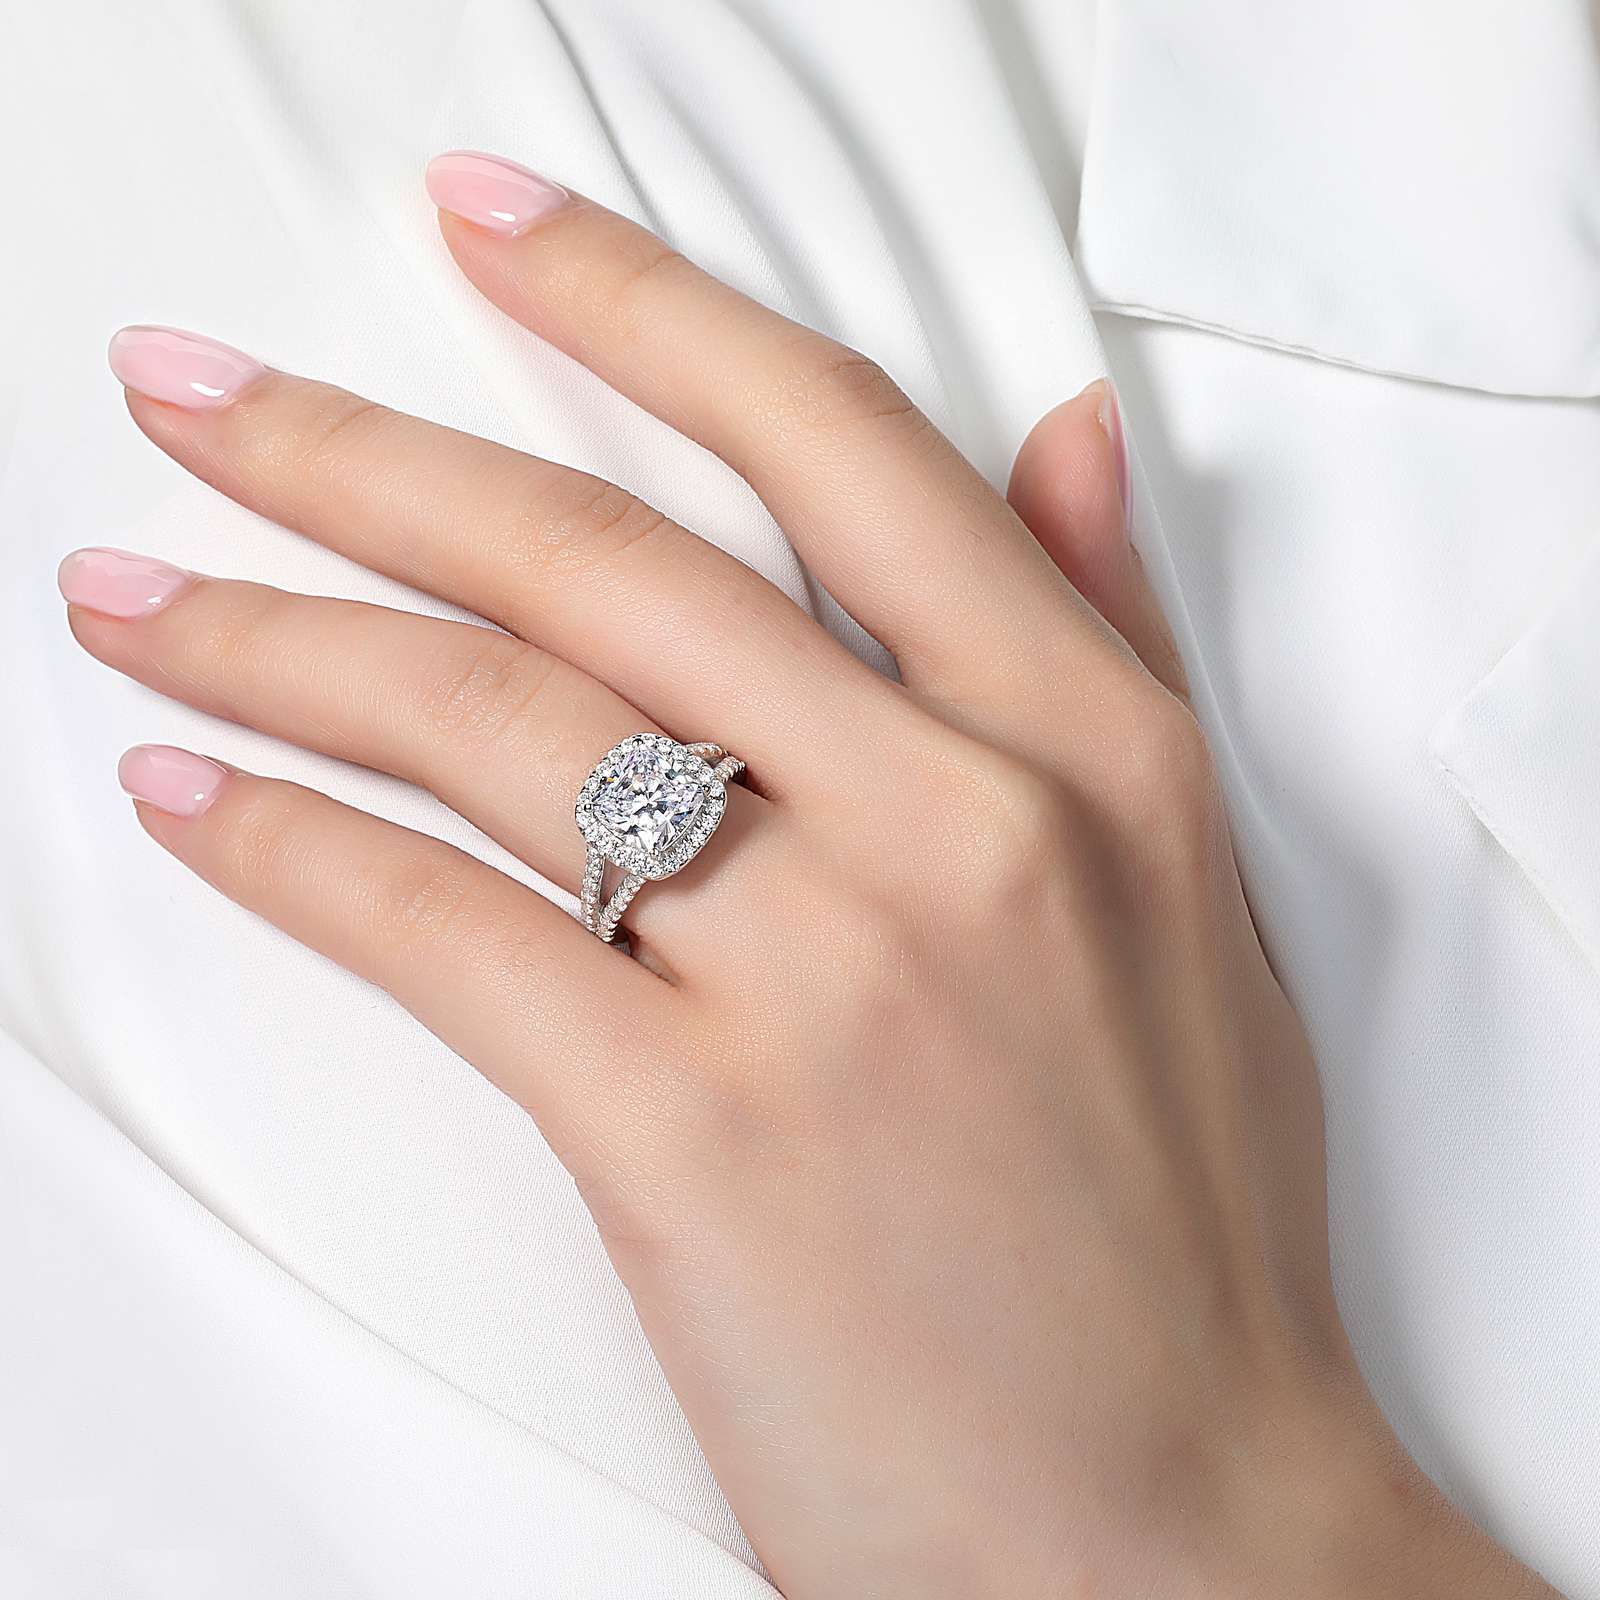 Square Halo Engagement Ring | LAFONN | Luby 